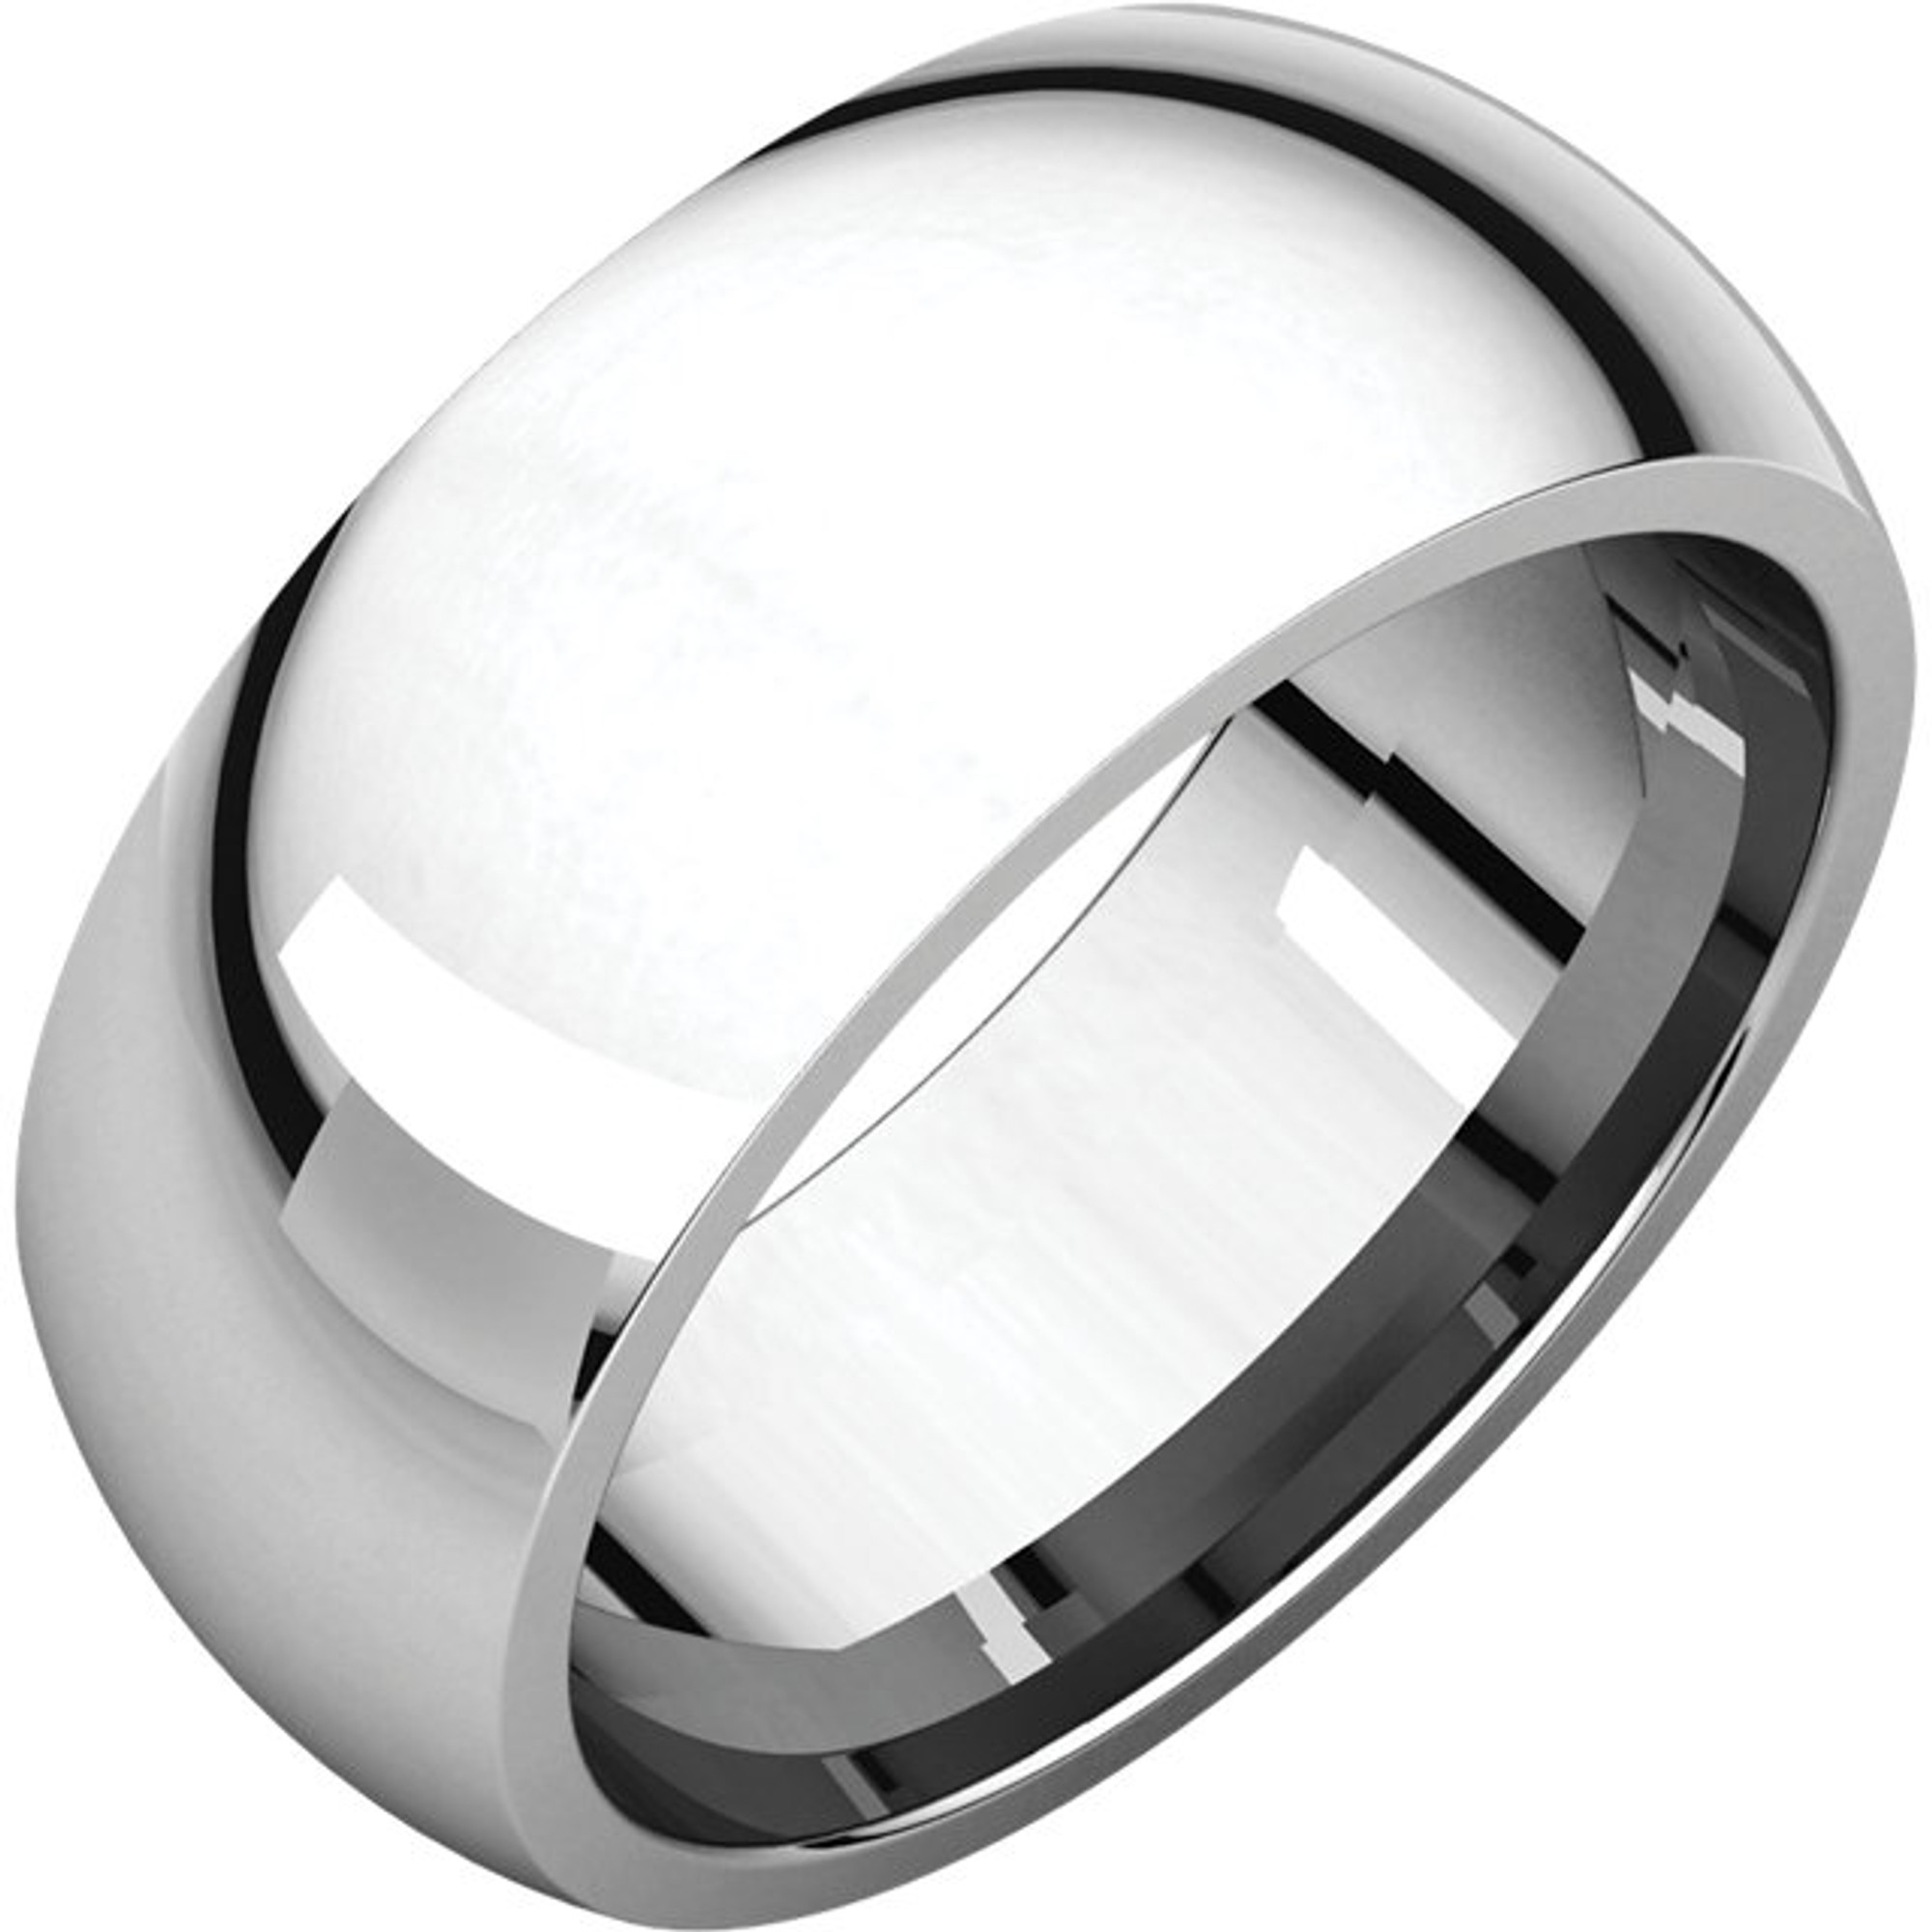 Continuum Sterling Silver 8mm High Polished Comfort Fit Wedding Band